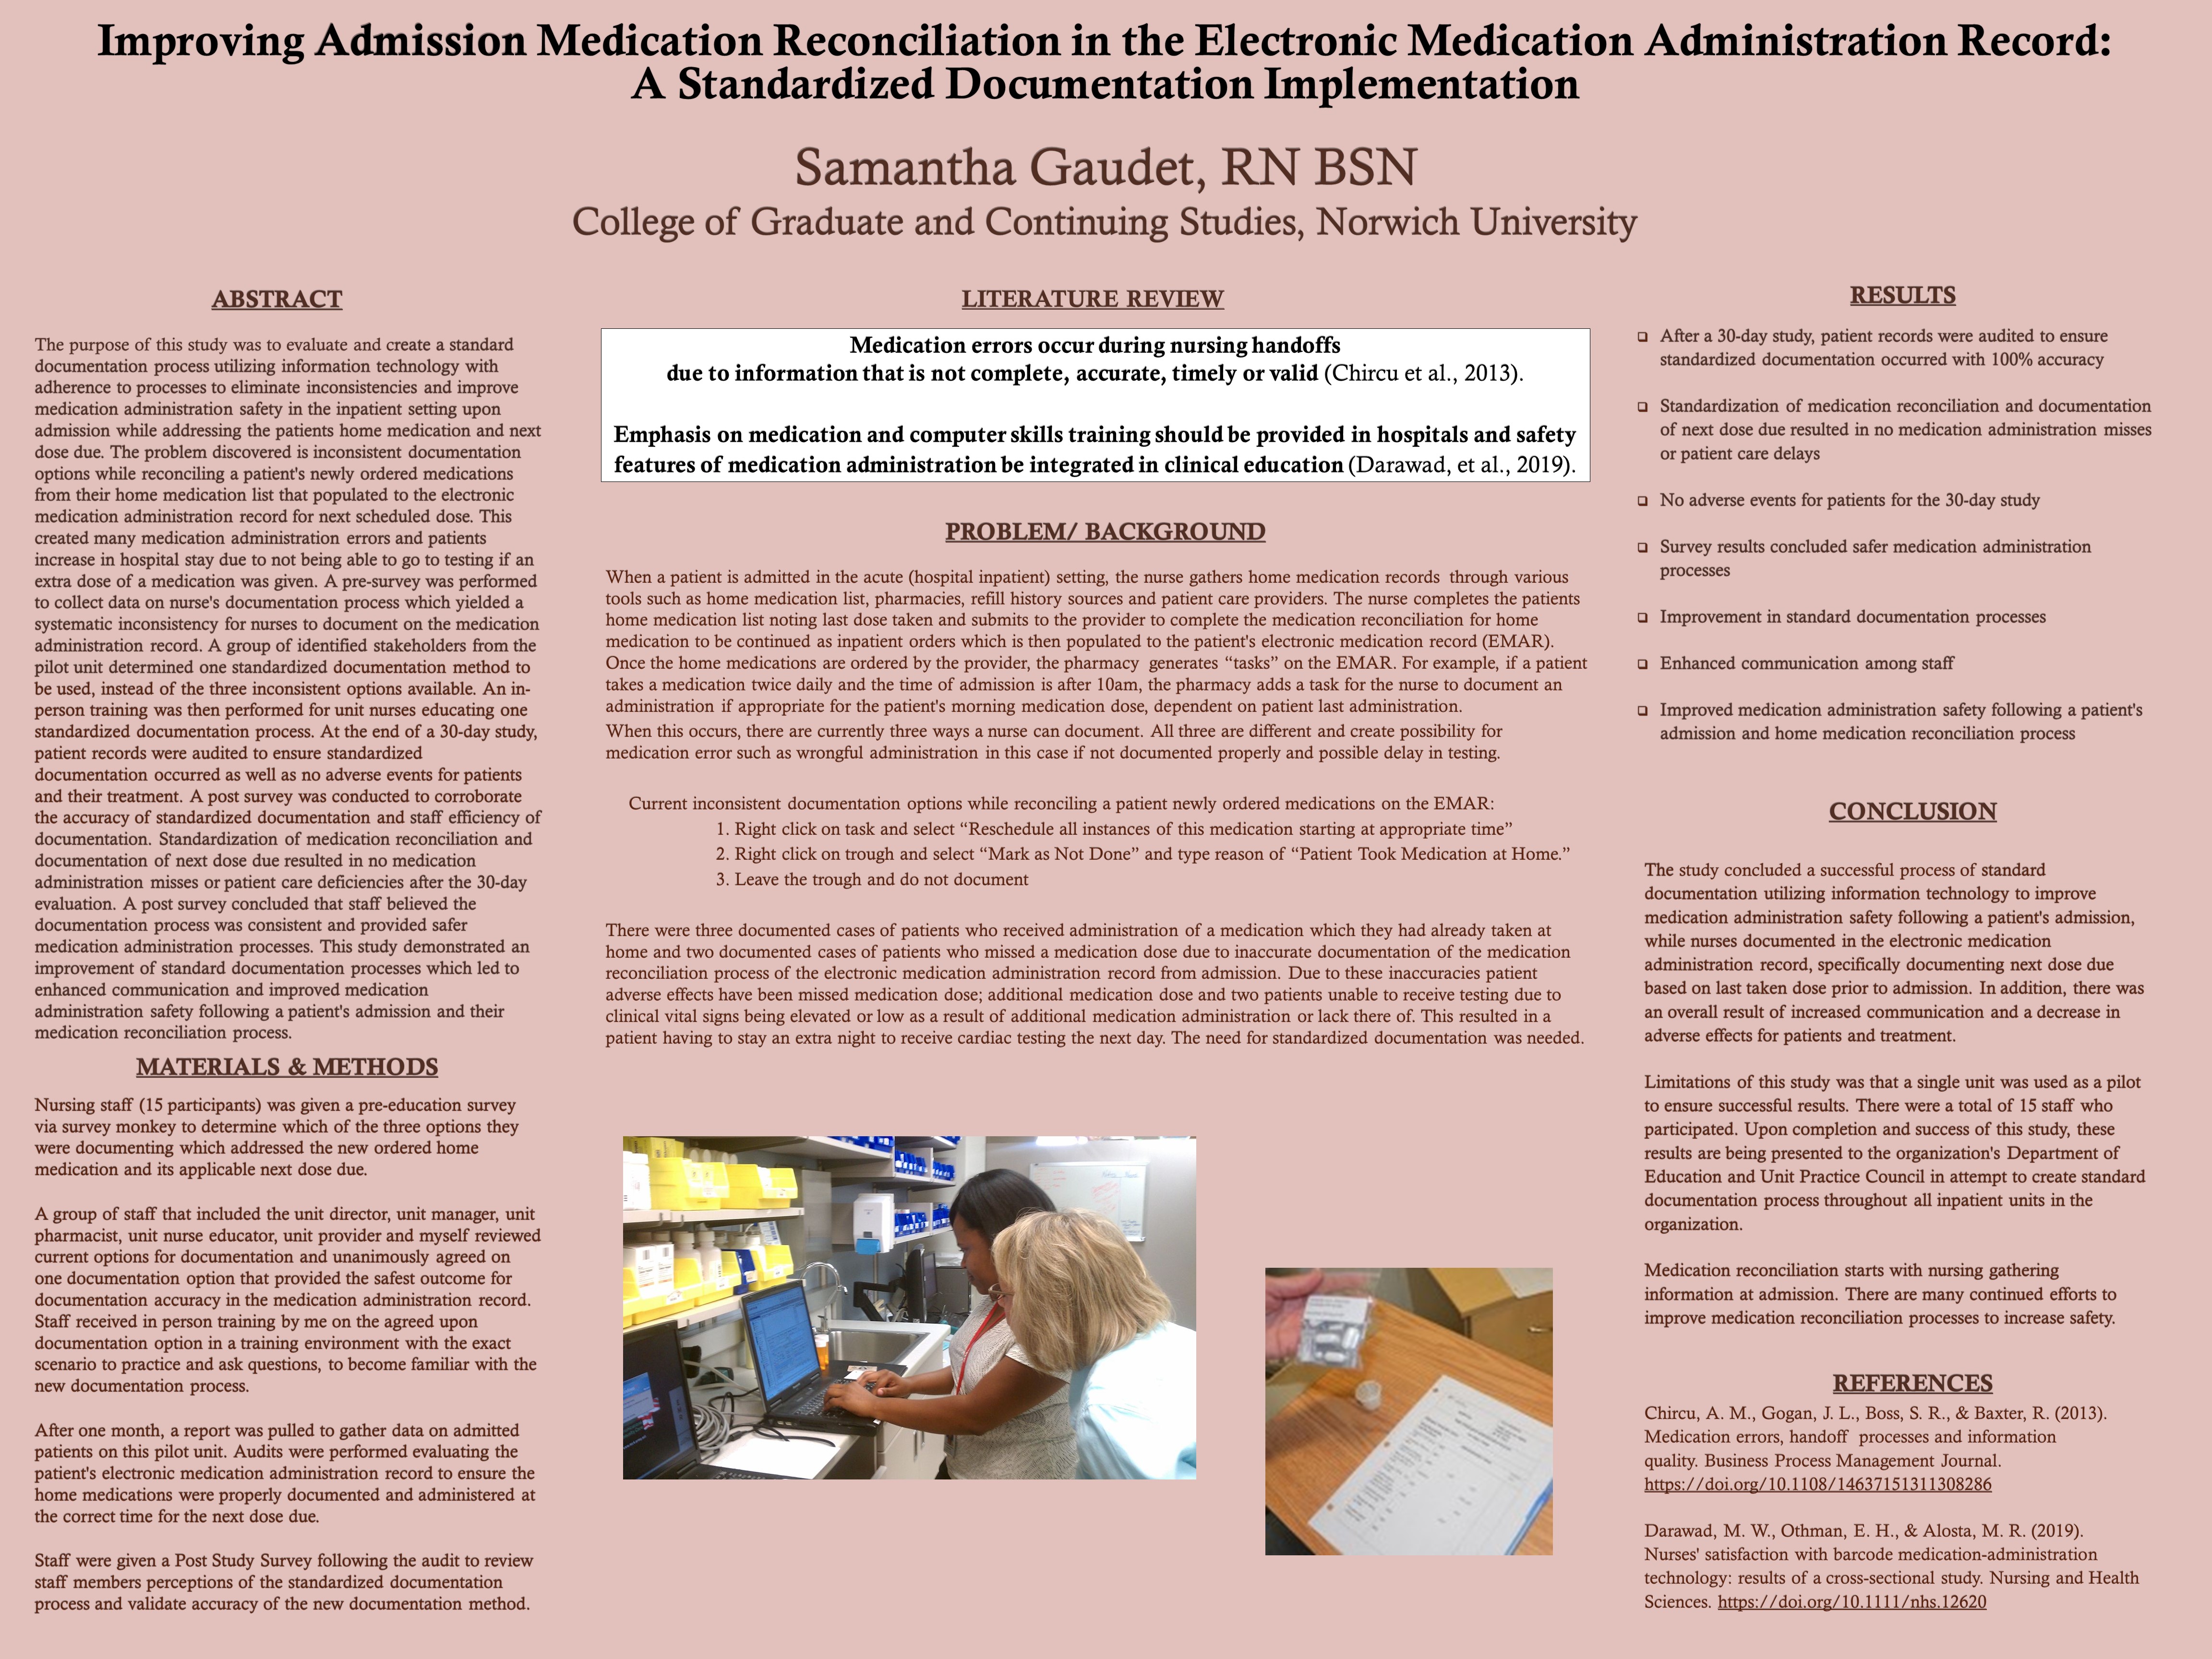 Showcase Image for Improving Admission Medication Reconciliation in the Electronic Medication Administration Record: A Standardized Documentation Implementation